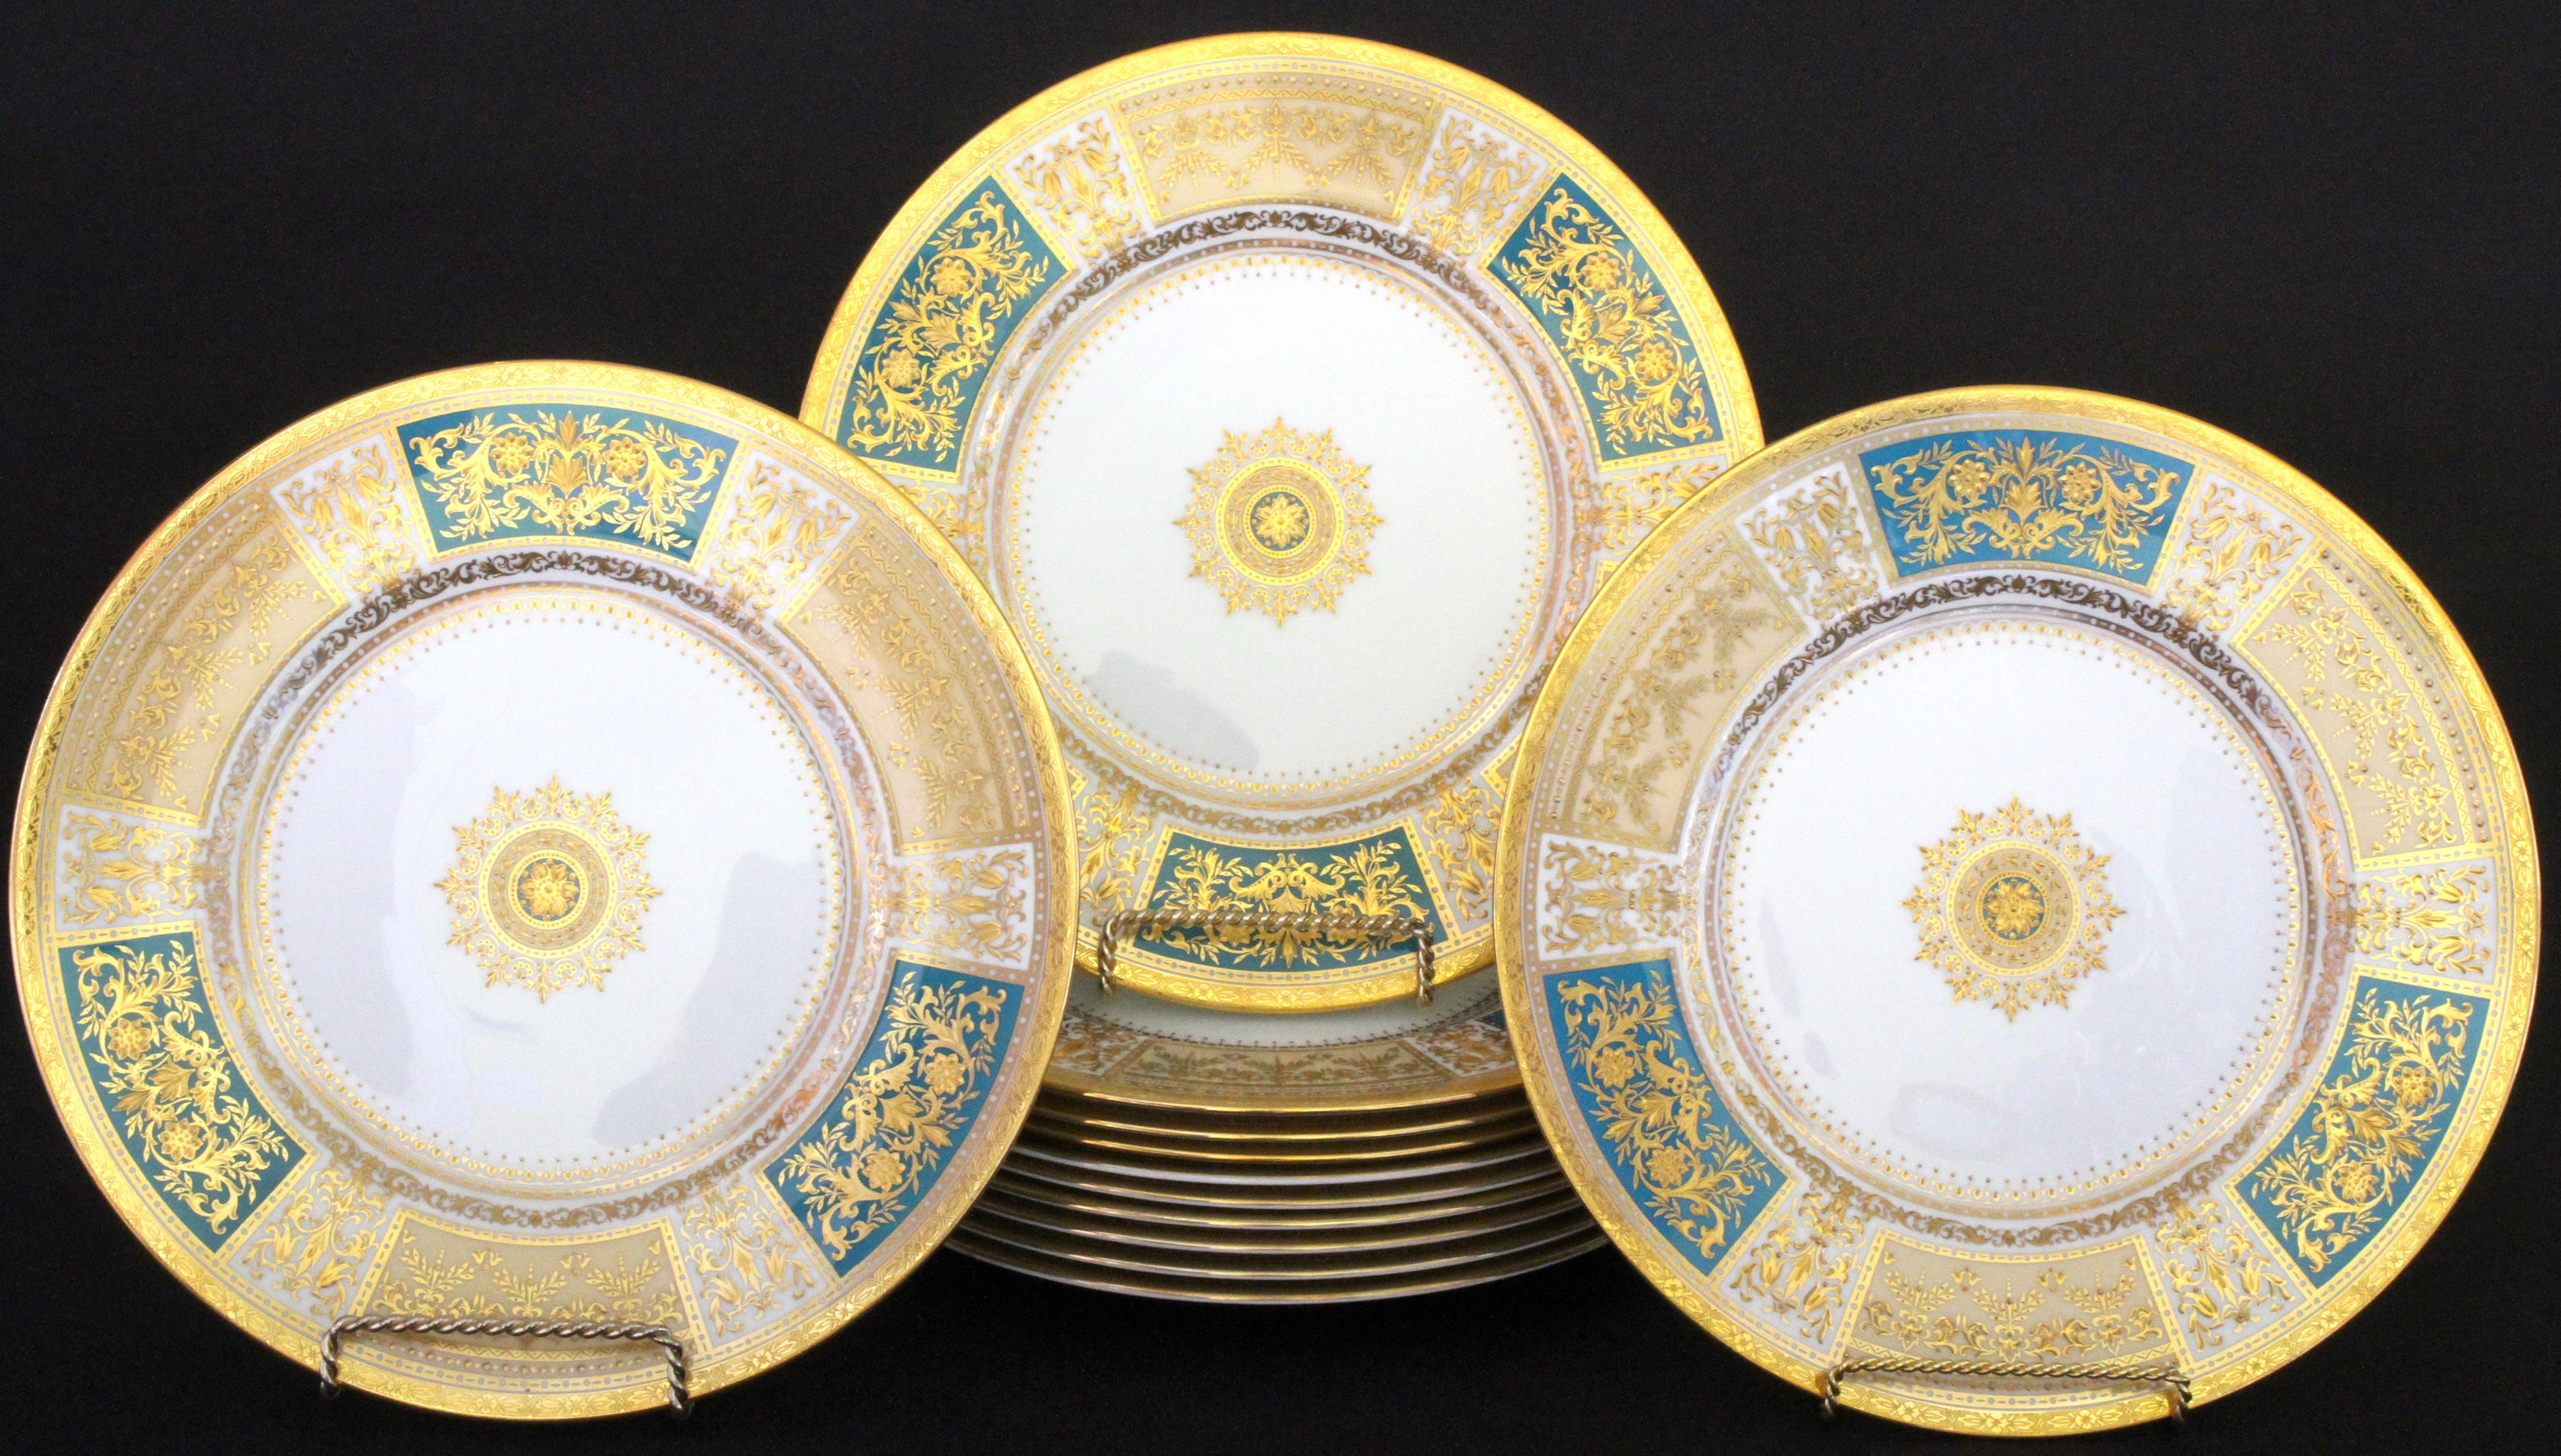 This set of Minton, Stoke-on-Trent, England, master-gilder service or dinner plates feature six 22-karat gold-beaded panels, three cream and three turquoise, each decorated with ornate and elaborate ornaments composed of flowers, laurel, lotuses,